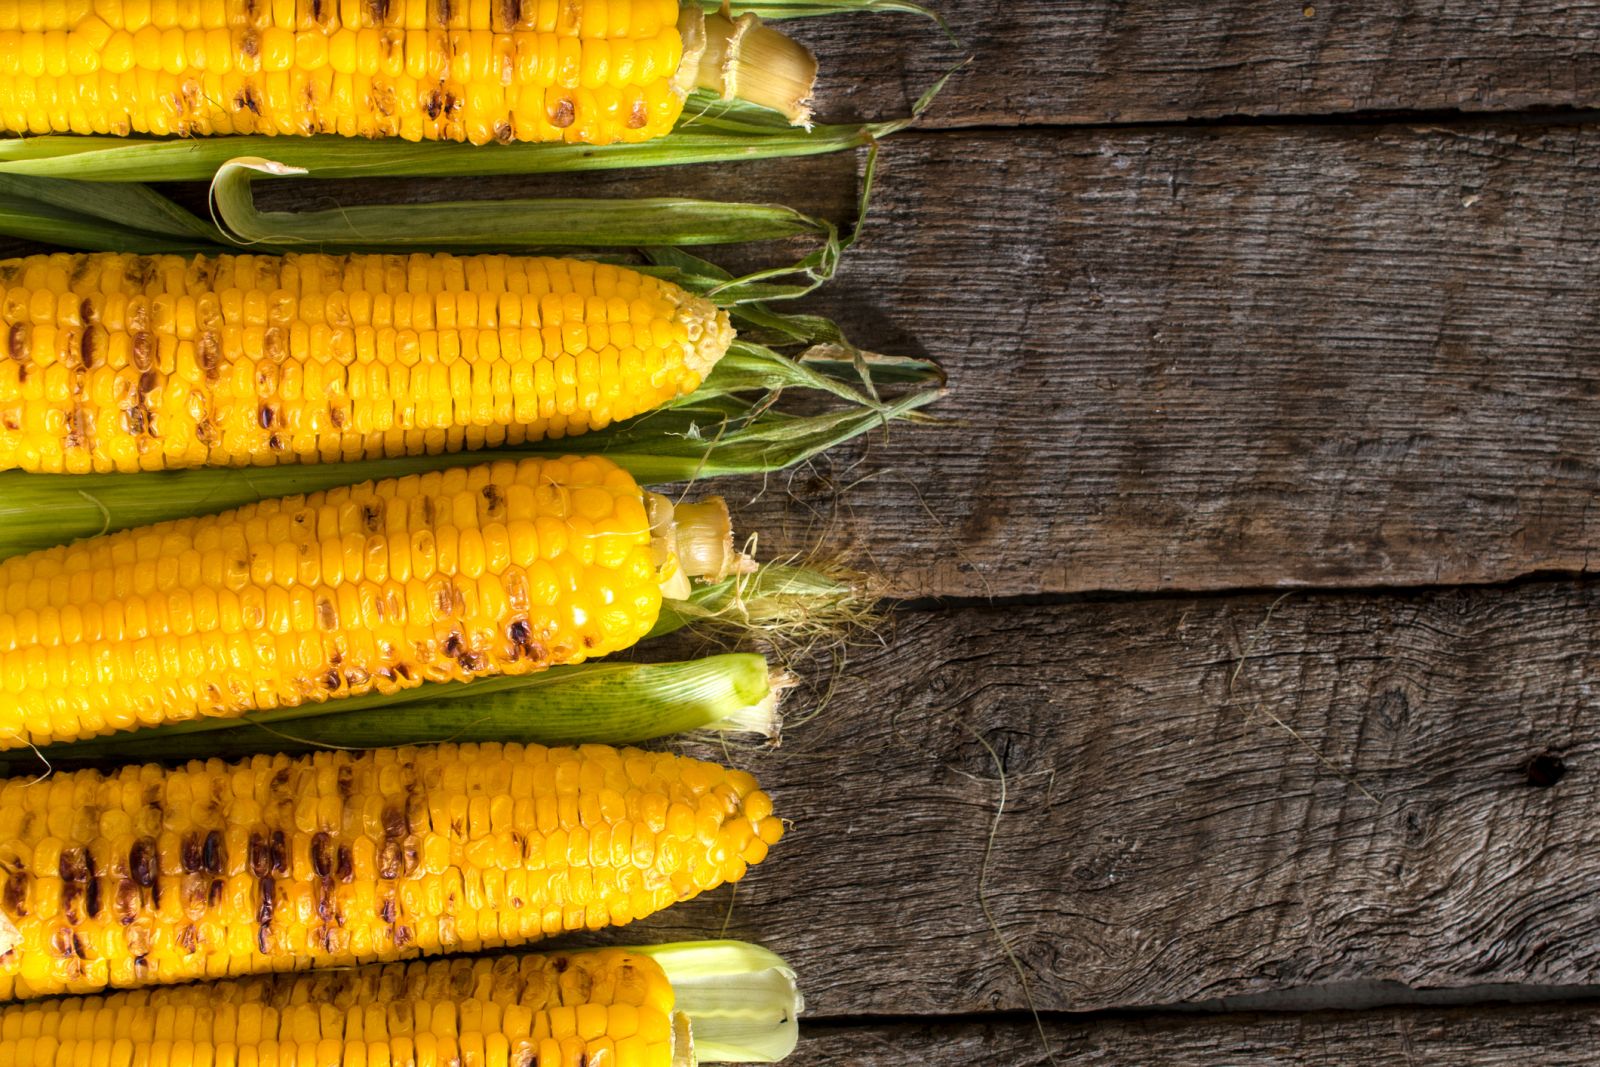 Grilled corn on wood table by badmanproduction via iStock